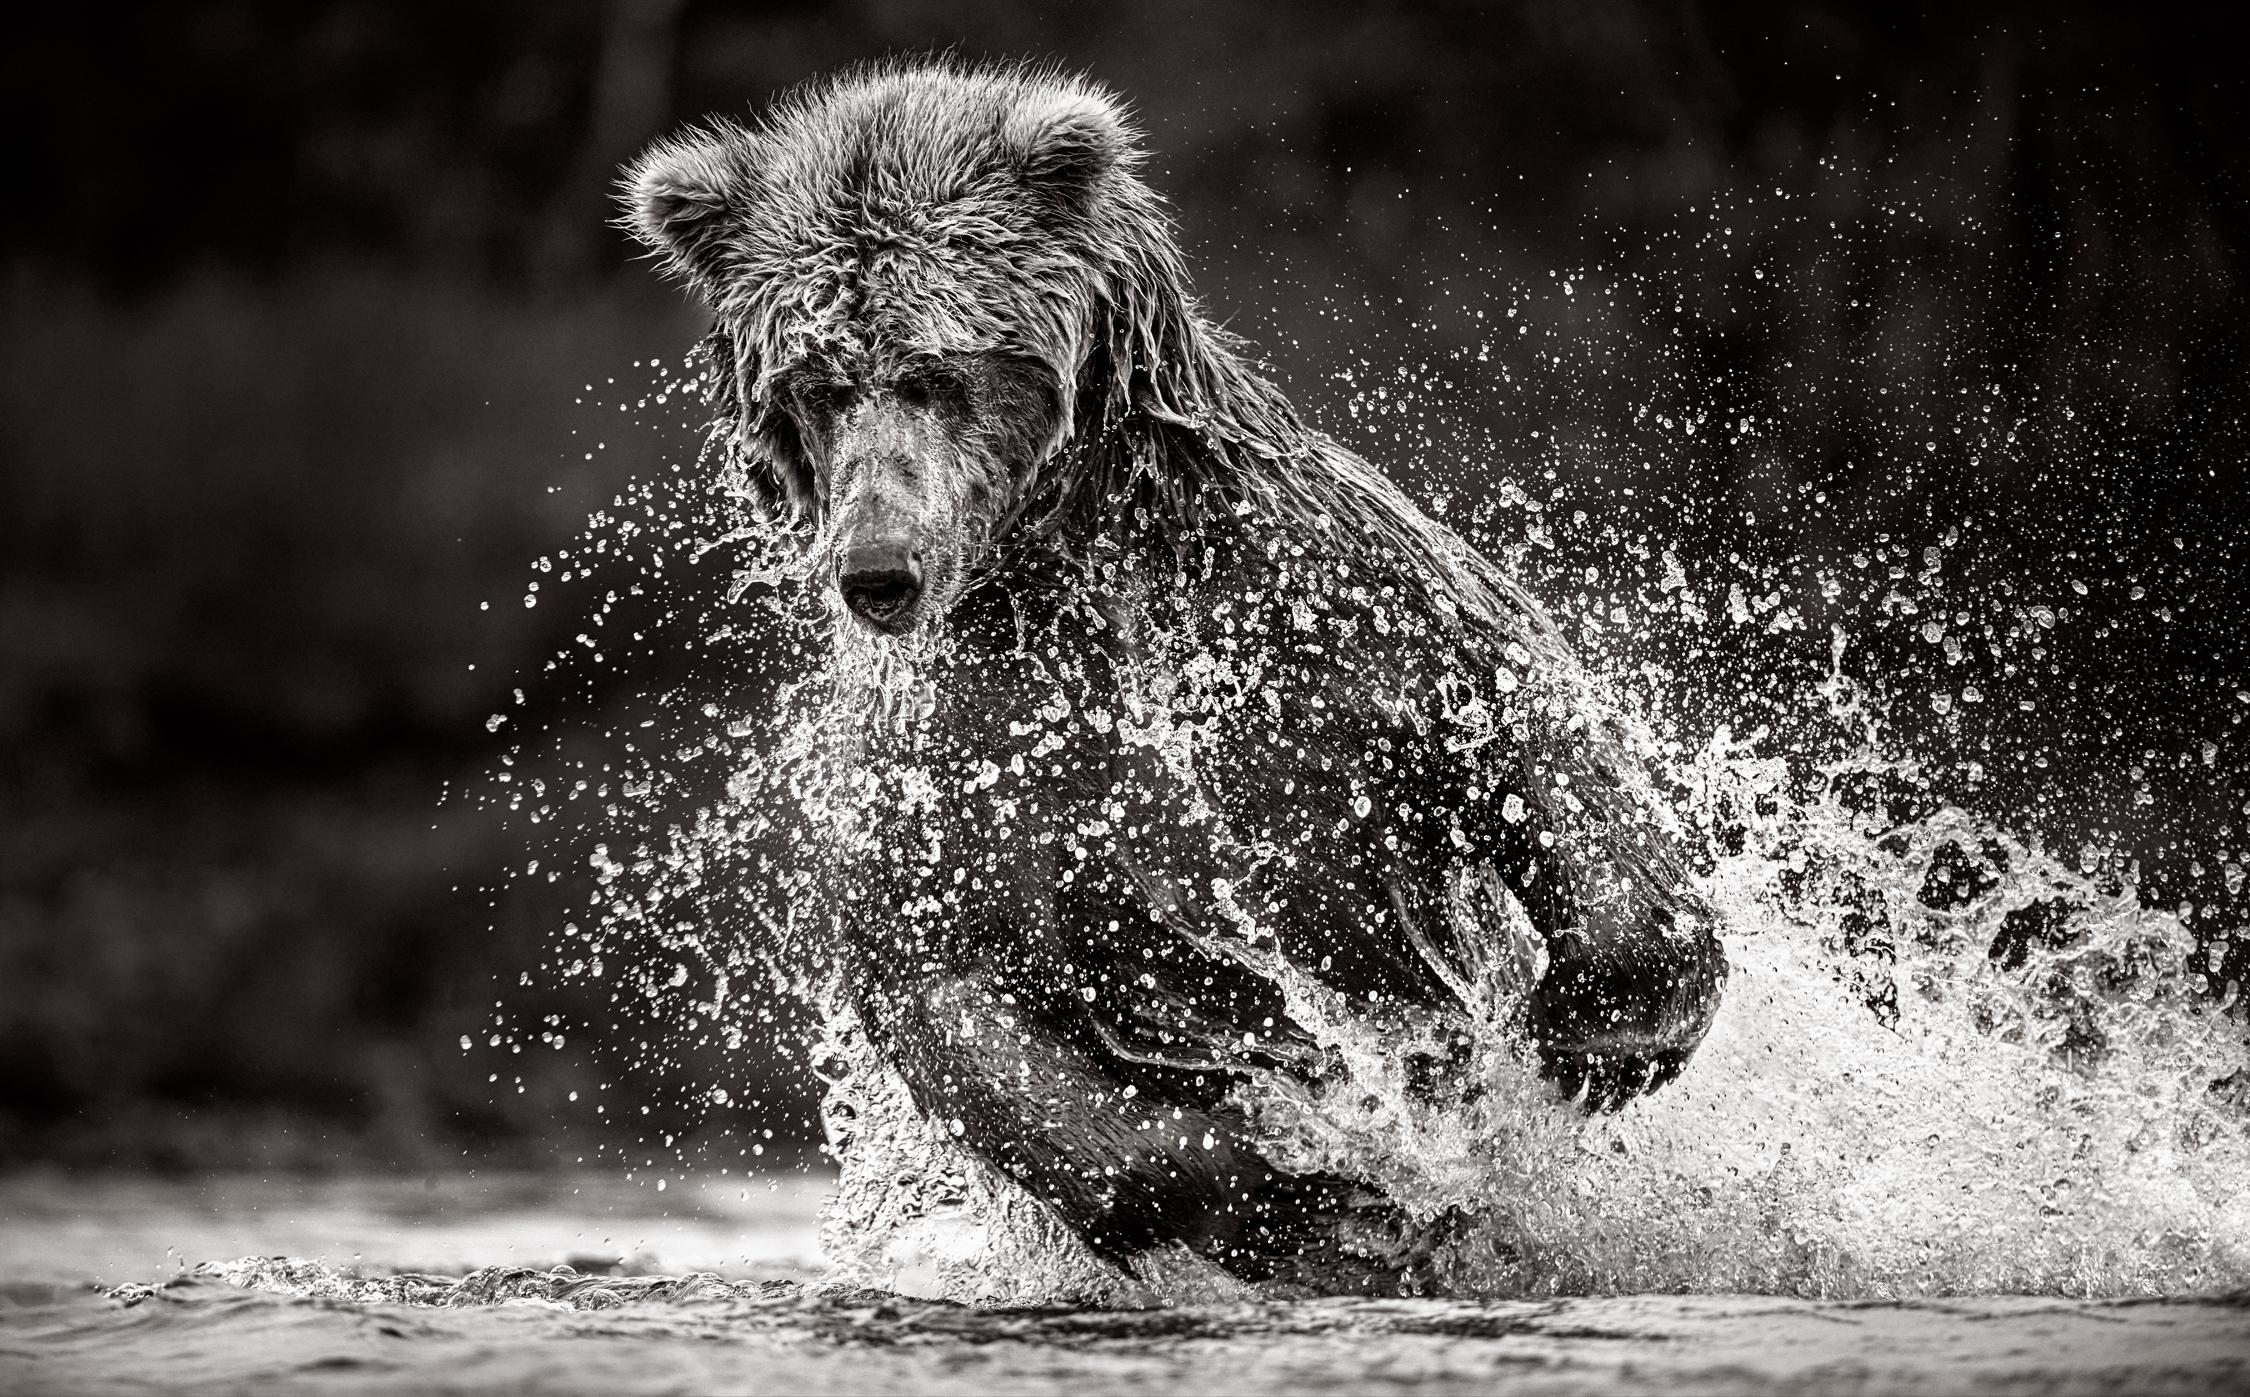 Drew Doggett Black and White Photograph – Brown Bear About To Dive Into The Creek